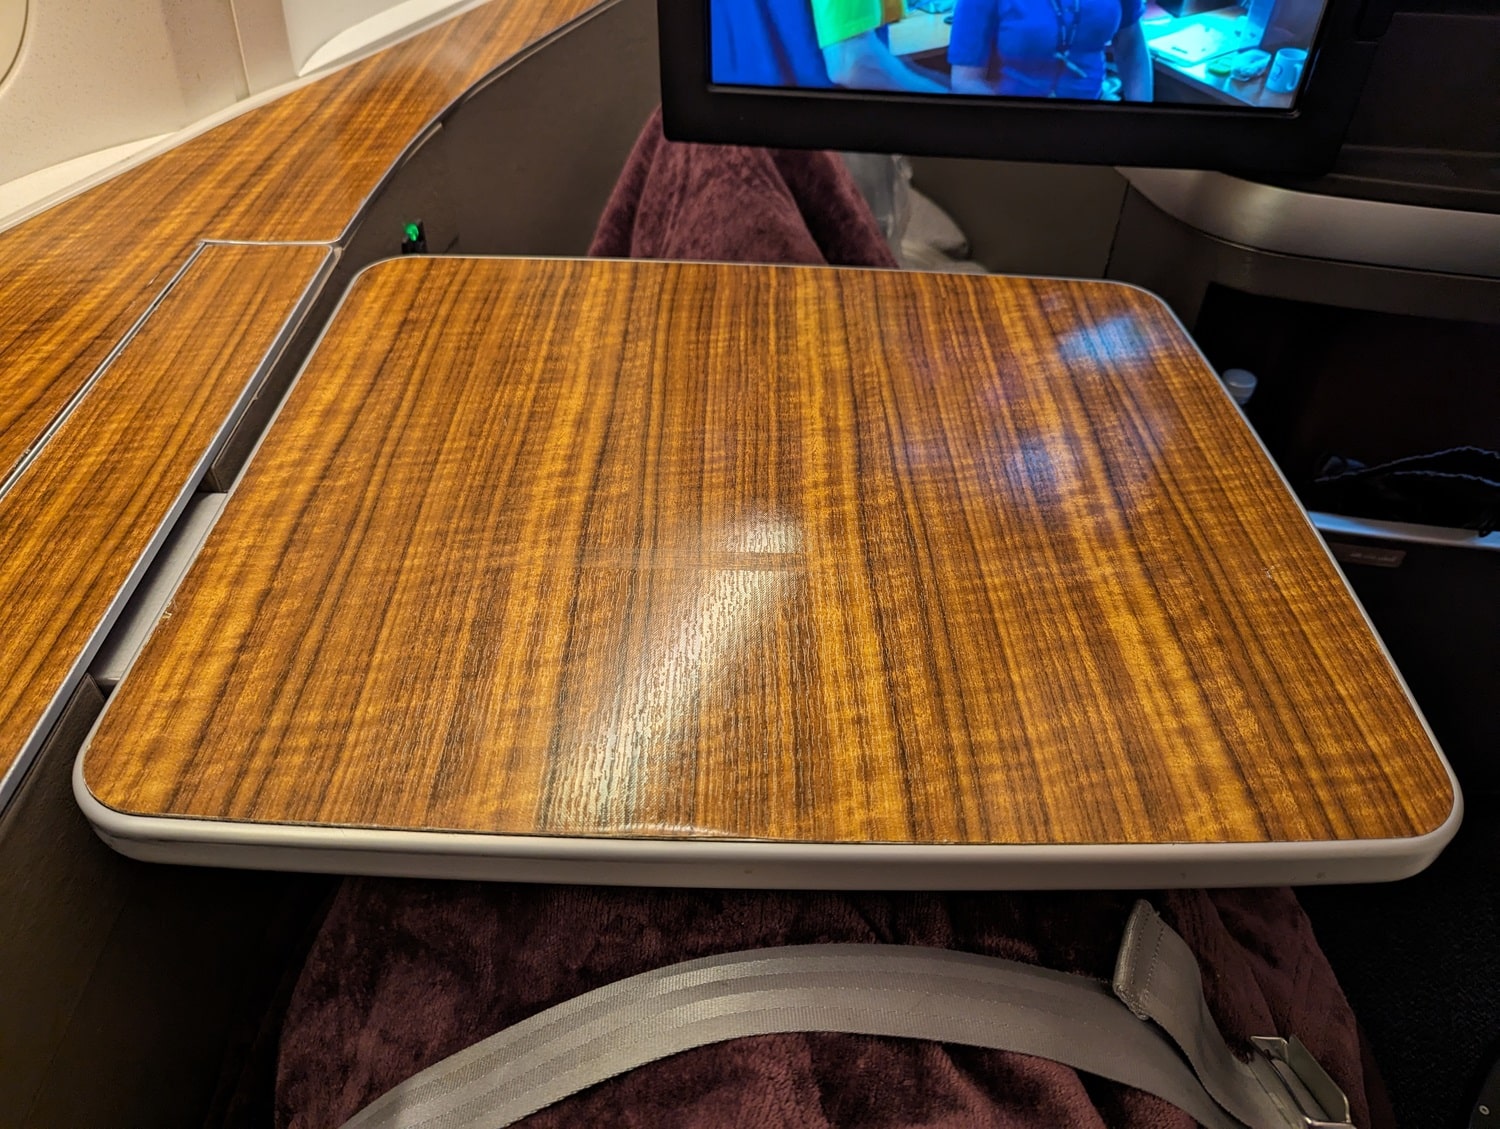 qatar airways first class 777-300er tray table extended